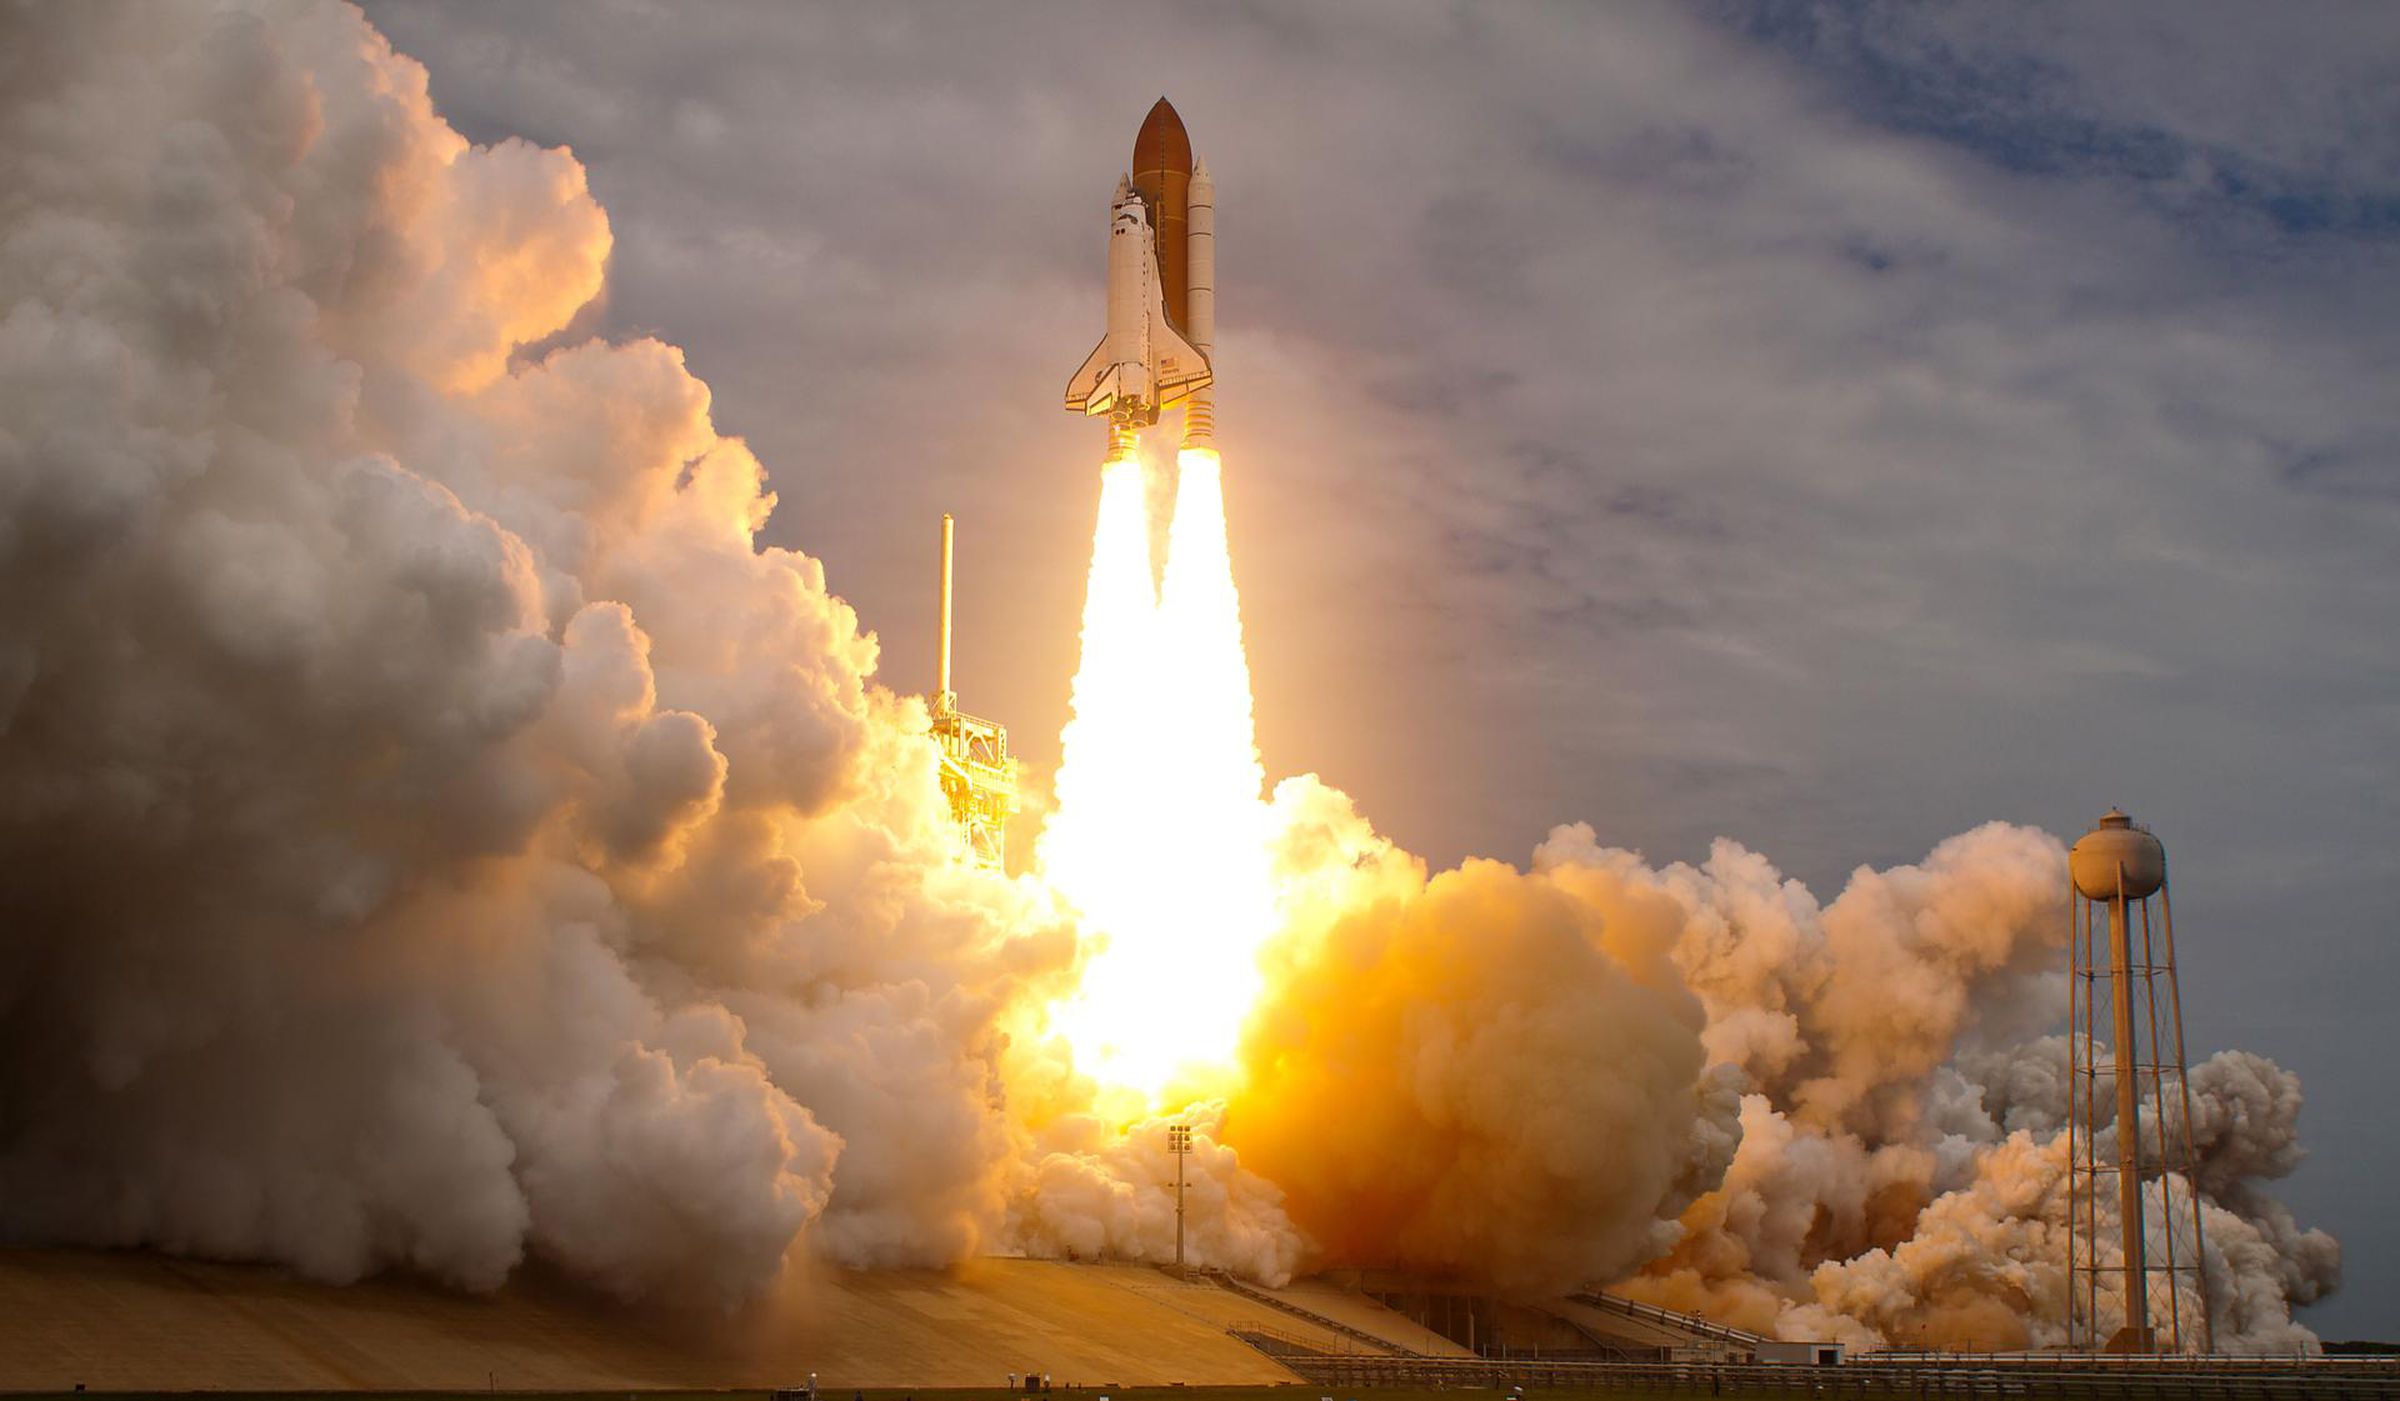 NASA’s Space Shuttle, built by contractors, flew its final flight in 2011